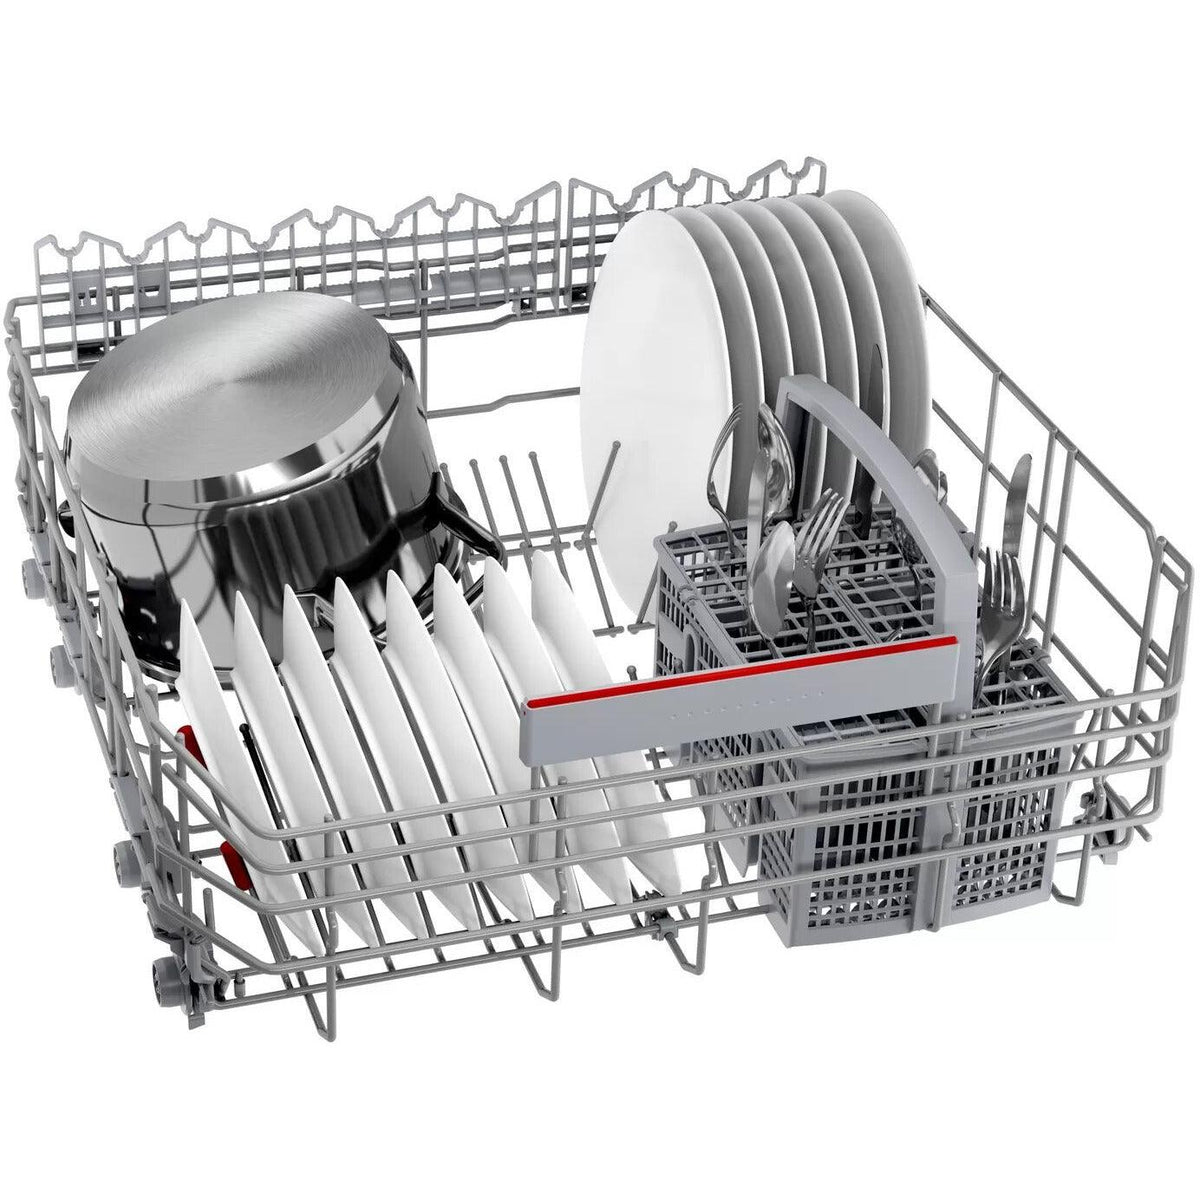 Bosh Serie 6 60CM Freestanding Standard Dishwasher - White | SMS6ZDW48G from DID Electrical - guaranteed Irish, guaranteed quality service. (6977634500796)